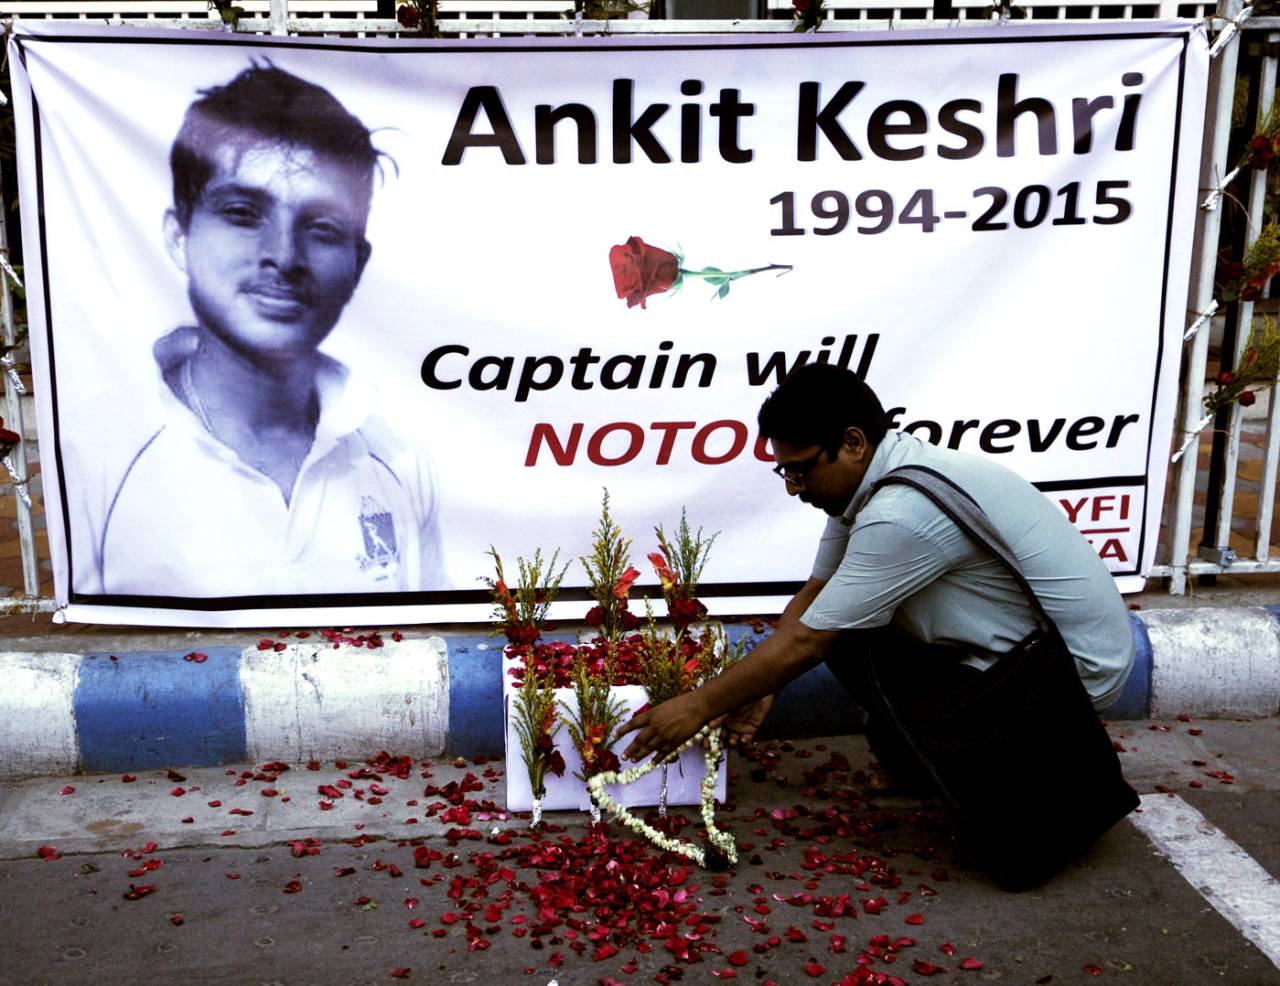 Ankit Keshri died on April 20 after colliding with a team-mate&nbsp;&nbsp;&bull;&nbsp;&nbsp;Getty Images